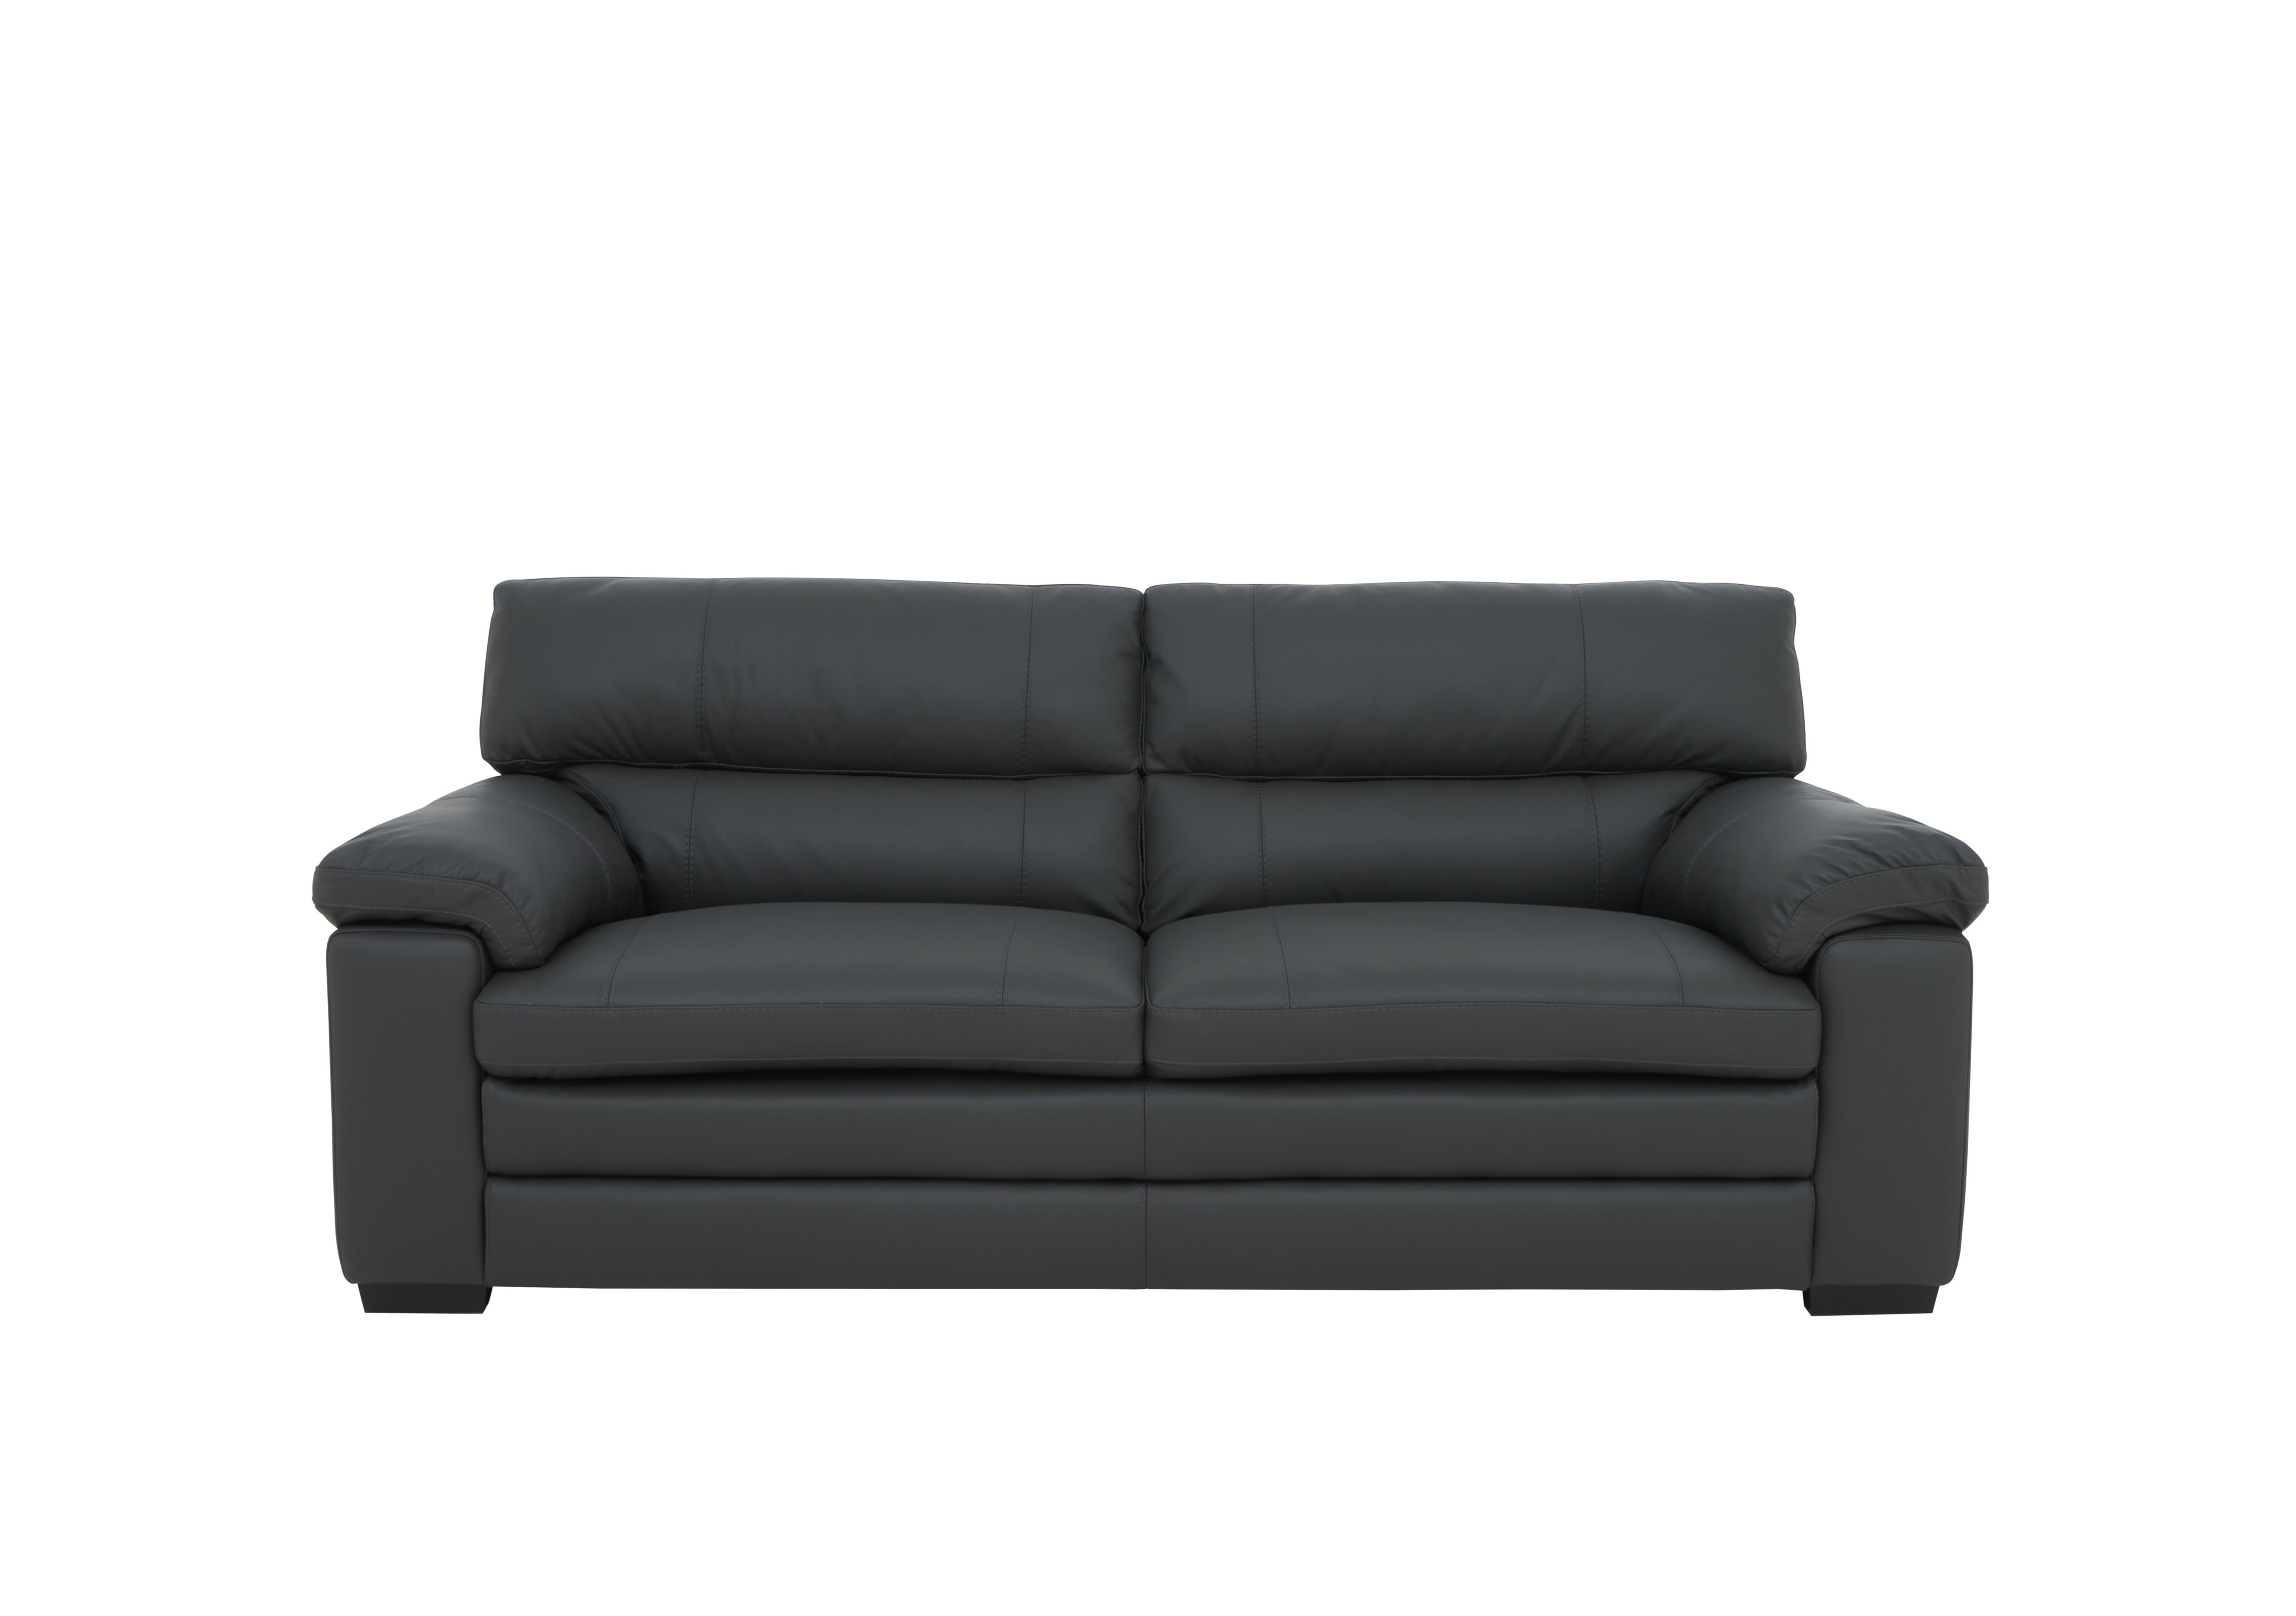 Cozee Leather 2.5 Seater Sofa in Nw-517e Shale Grey on Furniture Village